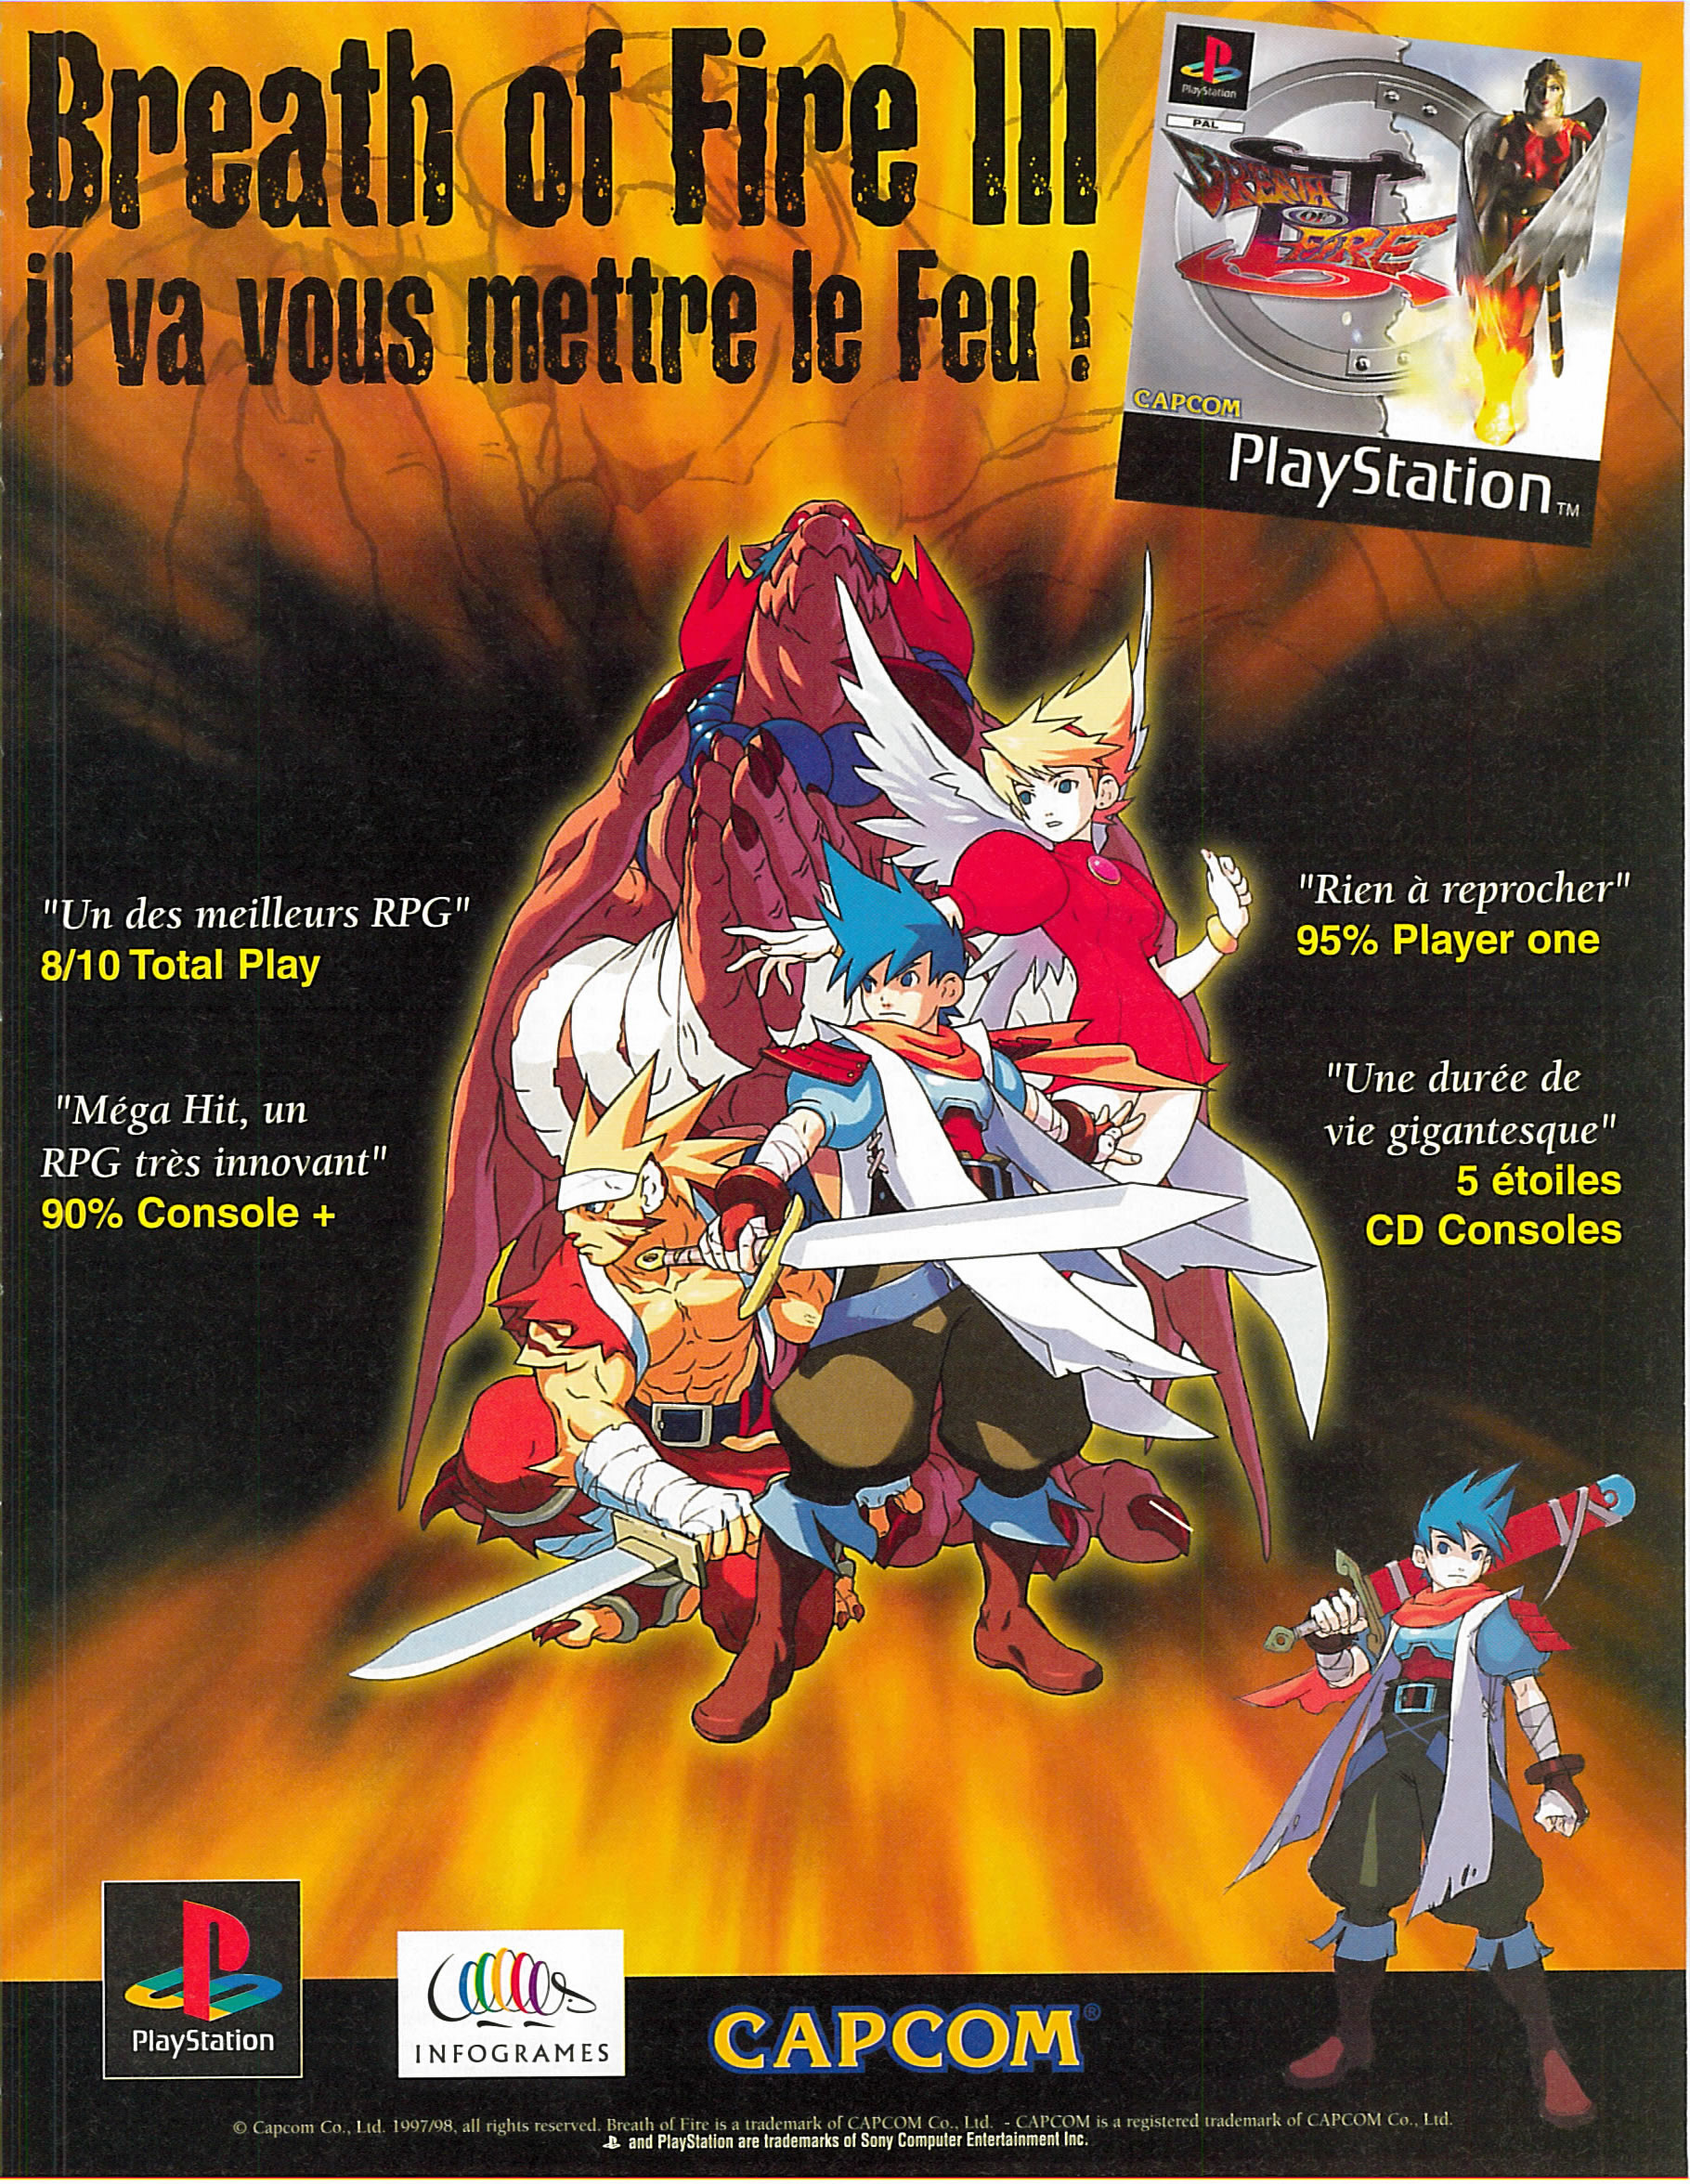 download breath of fire 2 ps1